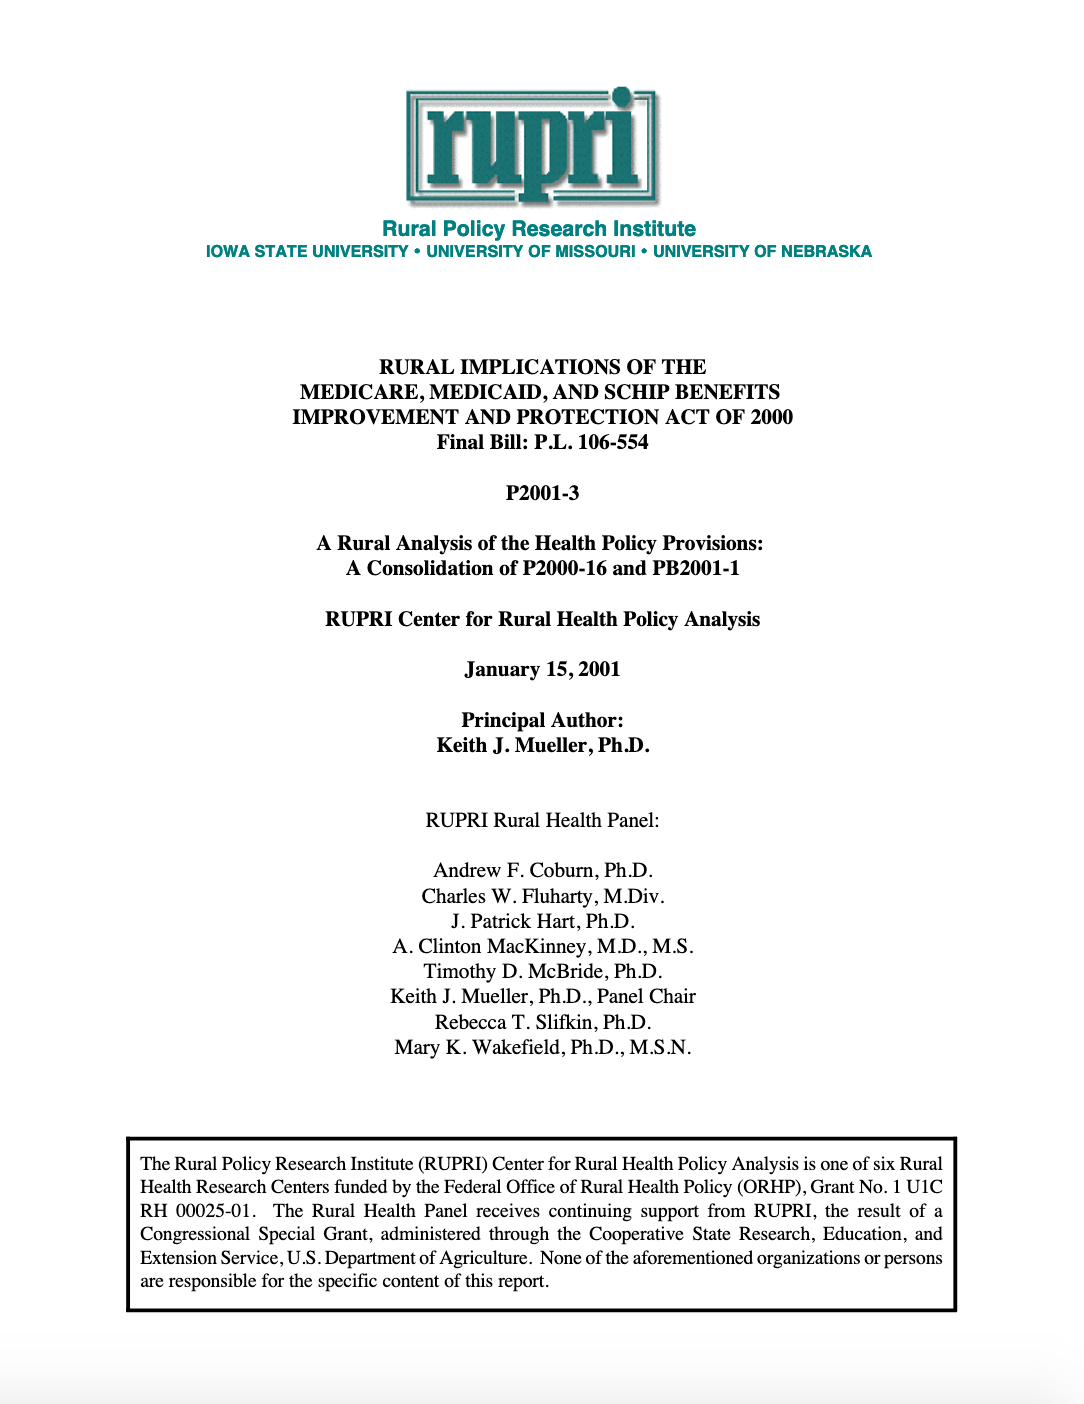 Rural Implications of the Medicare, Medicaid, and SCHIP Benefits Improvement and Protection Act of 2000 (Cover Image)